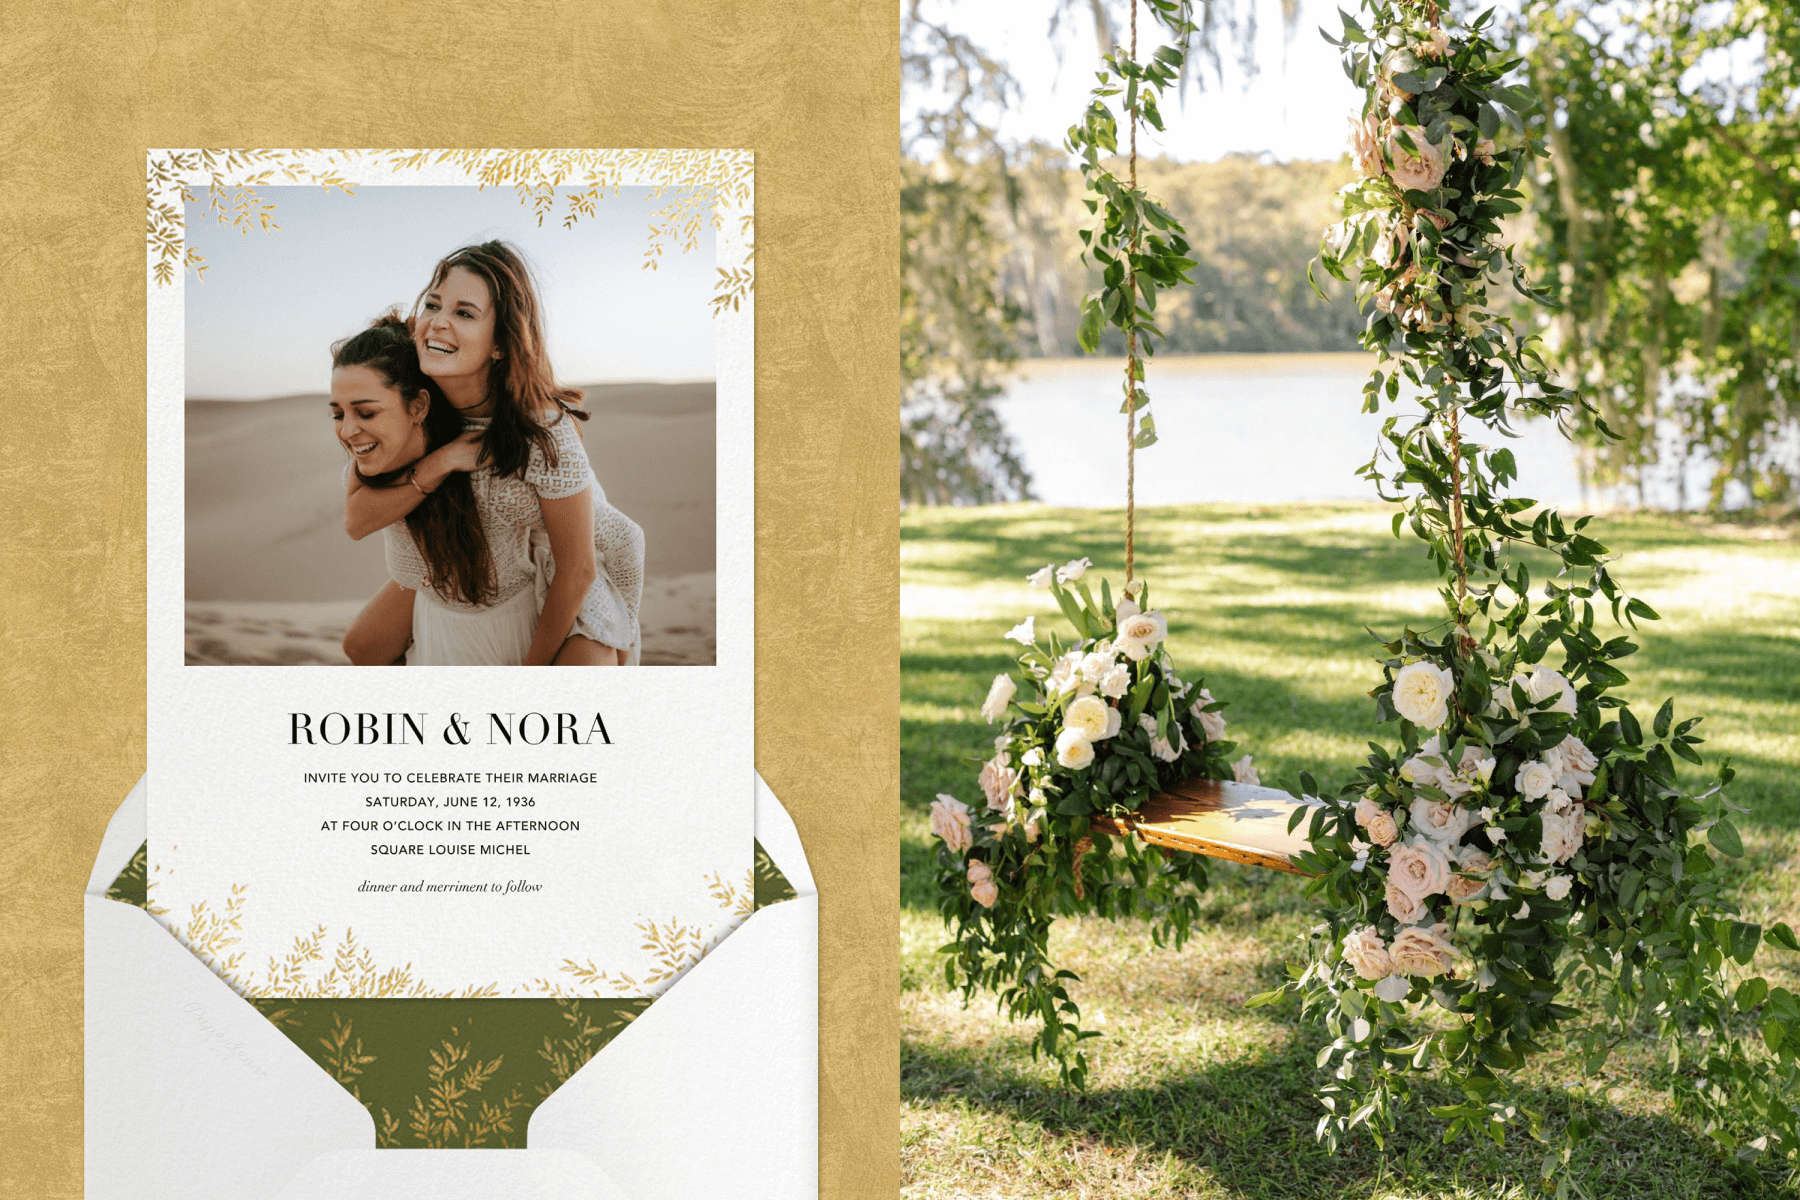 left: A wedding invitation with a couple of women giving each other a piggy back ride. Right: An outdoor wooden swing with roses installed on the ropes.